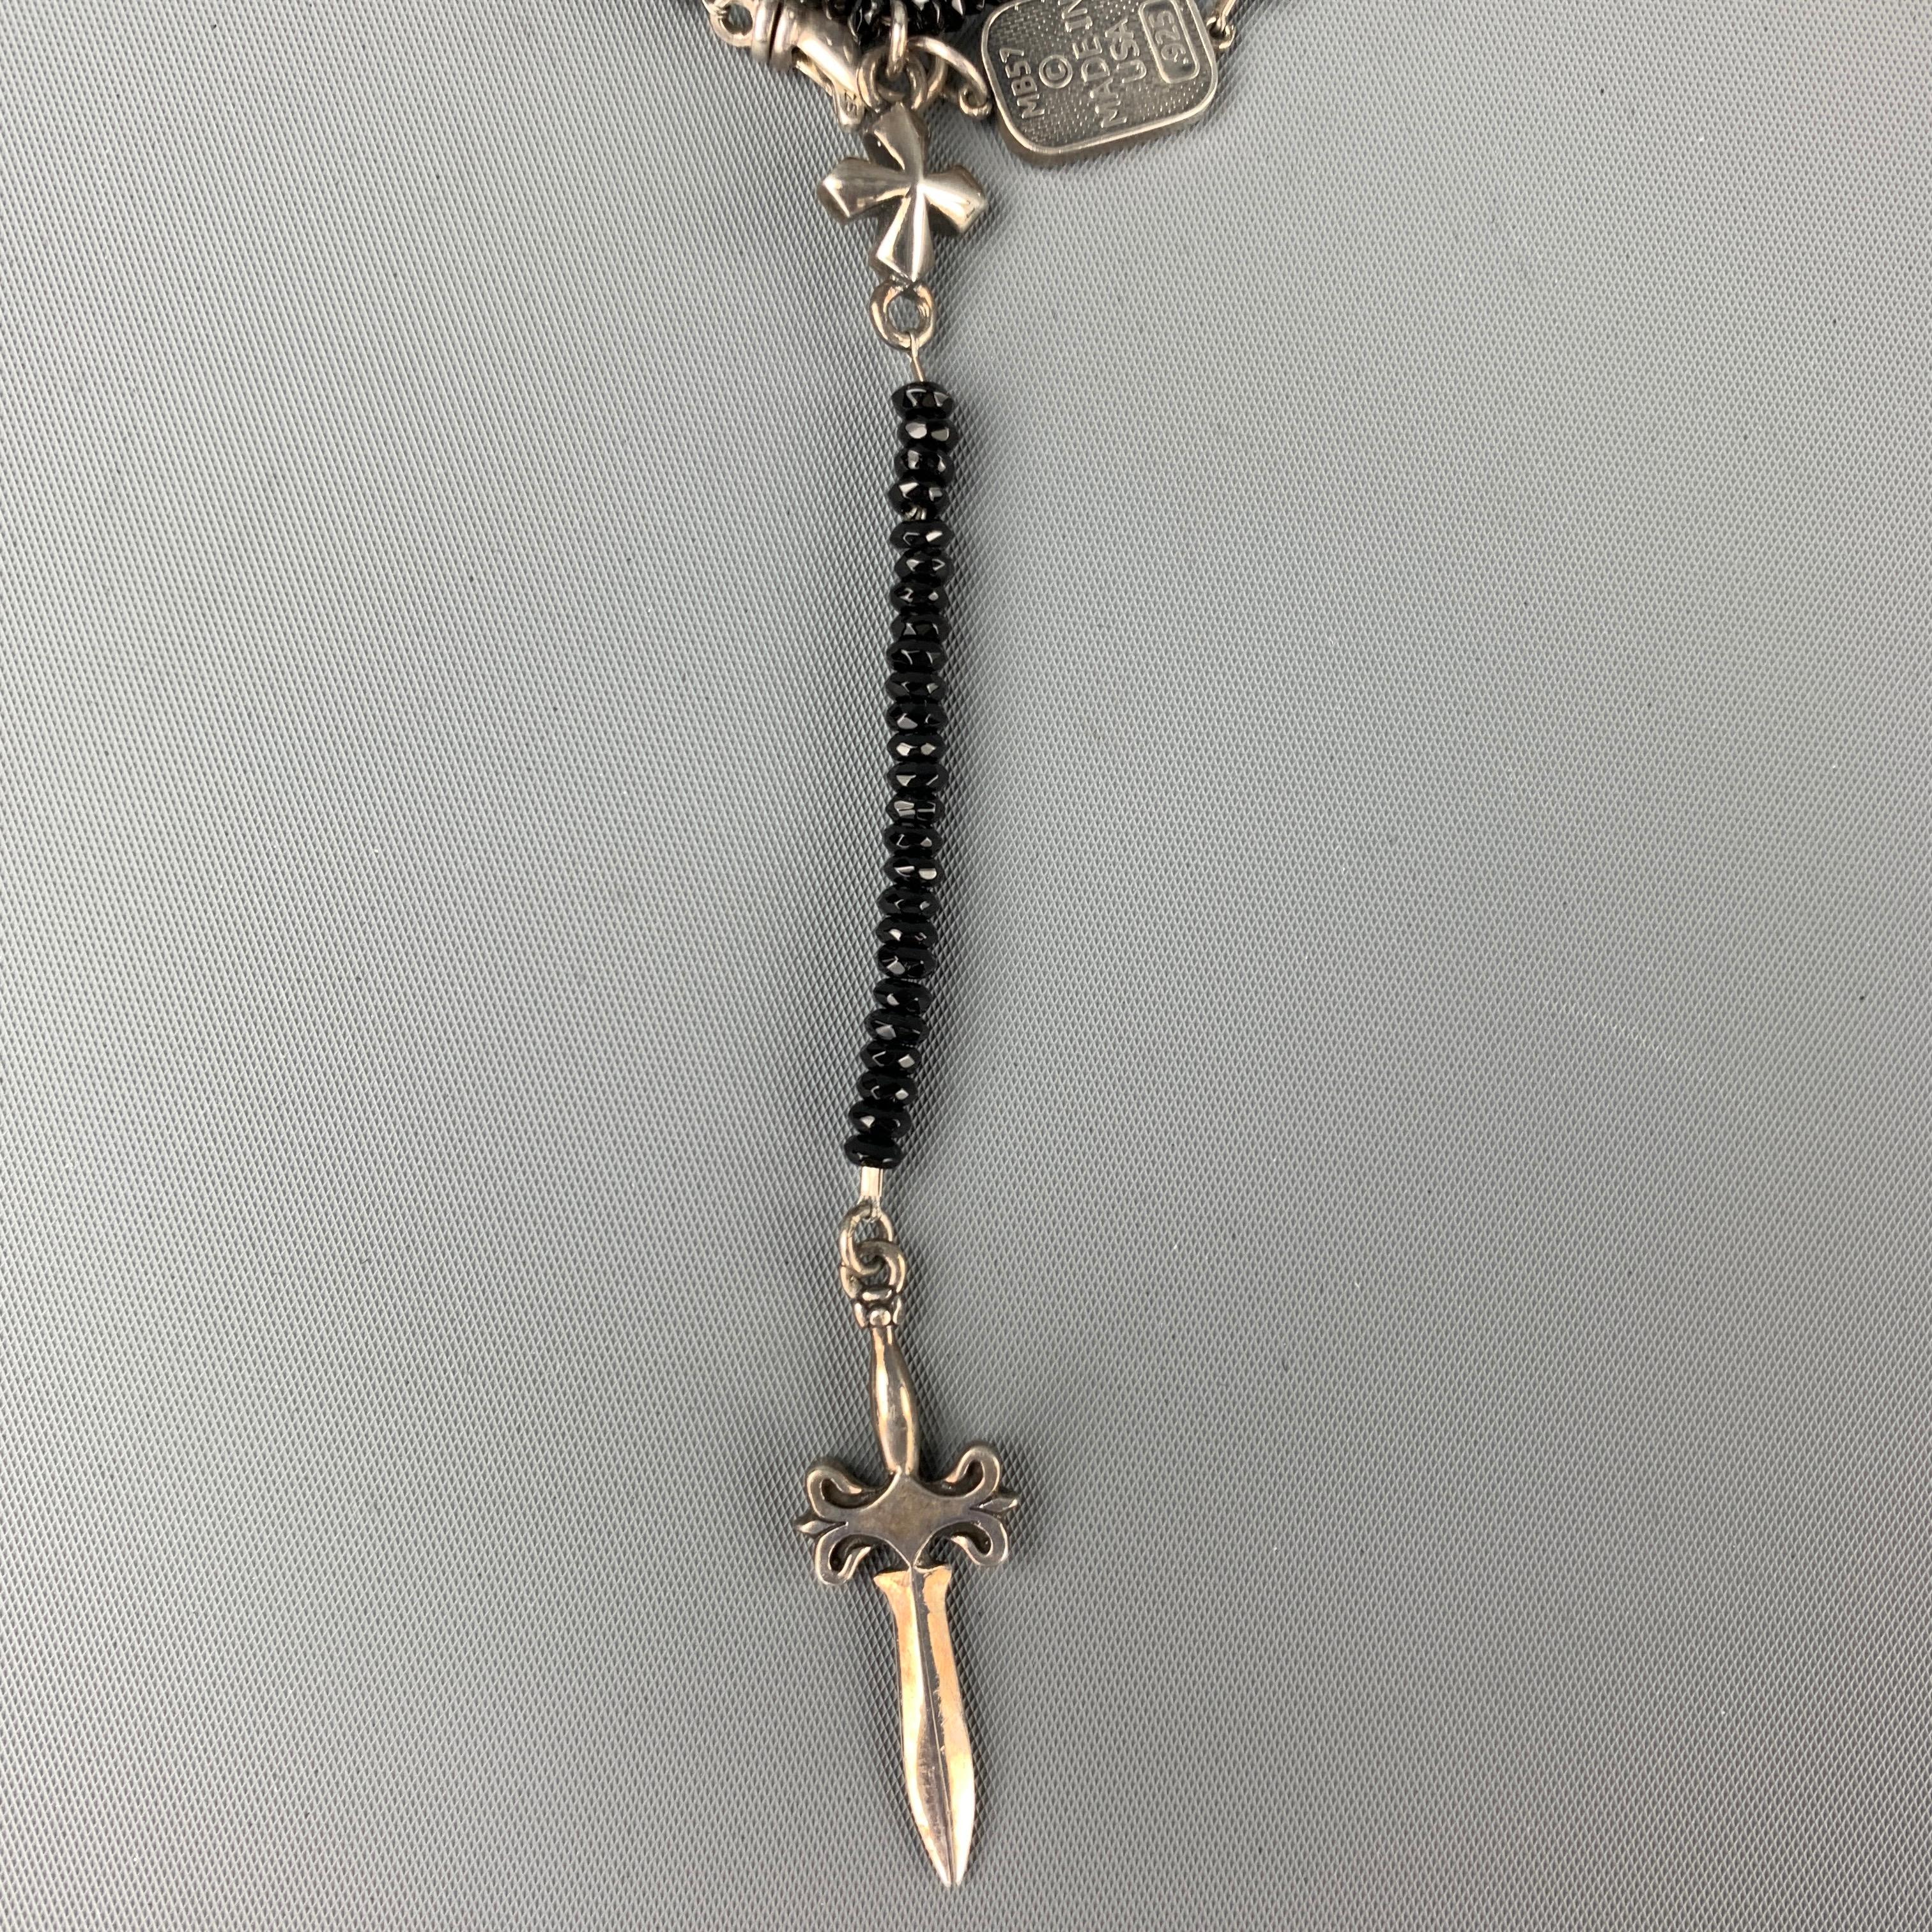 KING BABY necklace comes in a black beads featuring sterling silver dagger cross and a clasp closure.

Excellent Pre-Owned Condition.

Measurements:

Length: 29 in. 